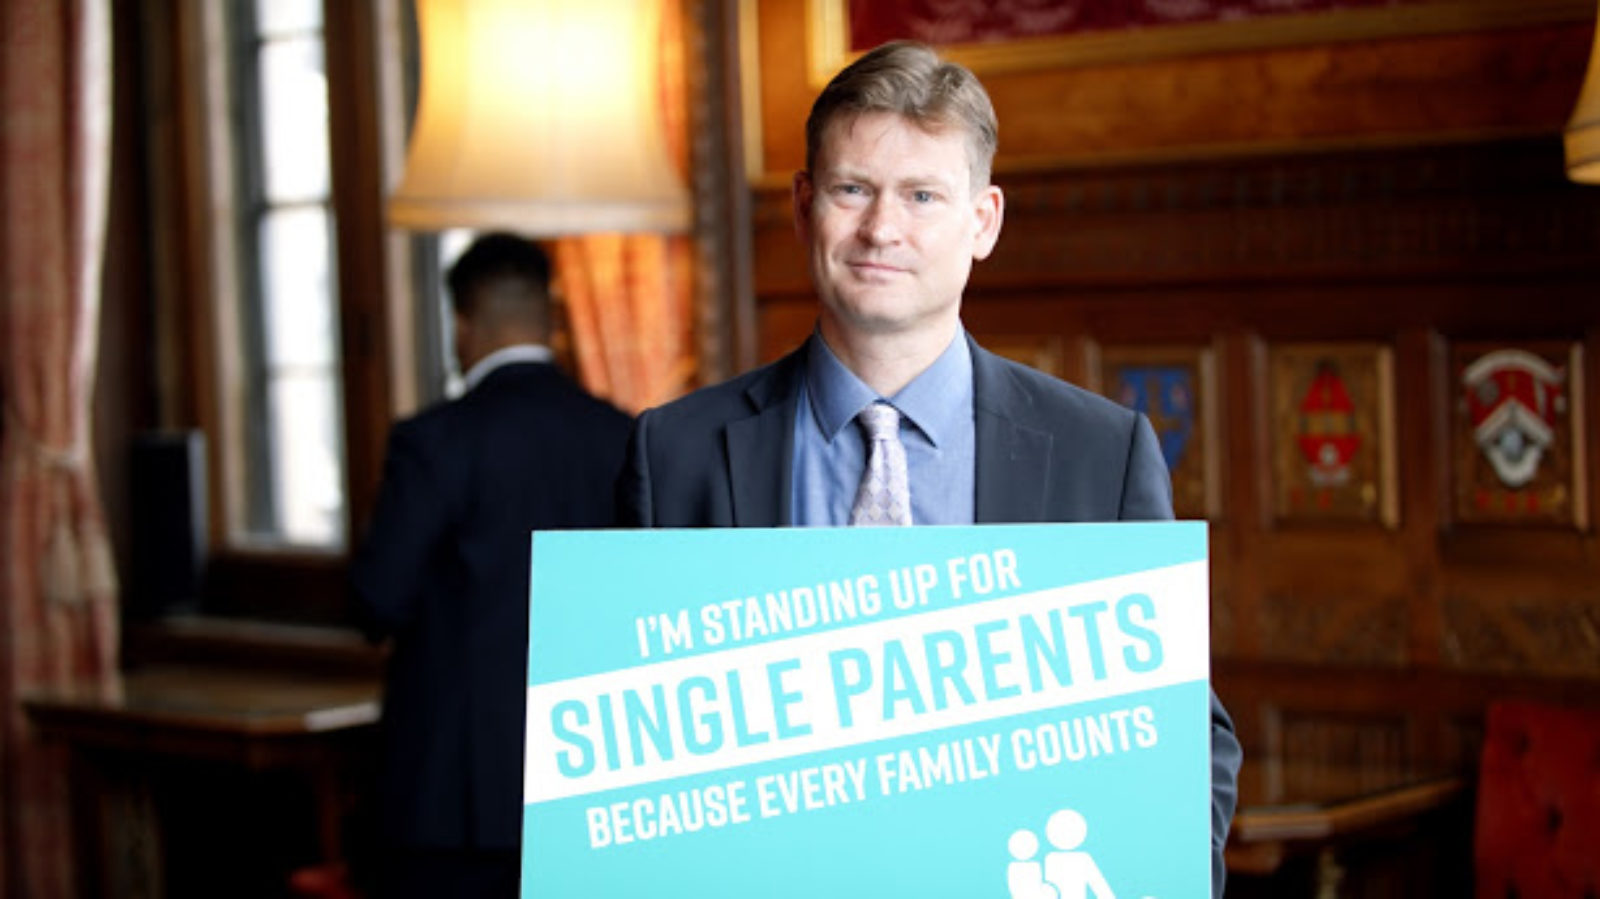 Standing up for single parent families